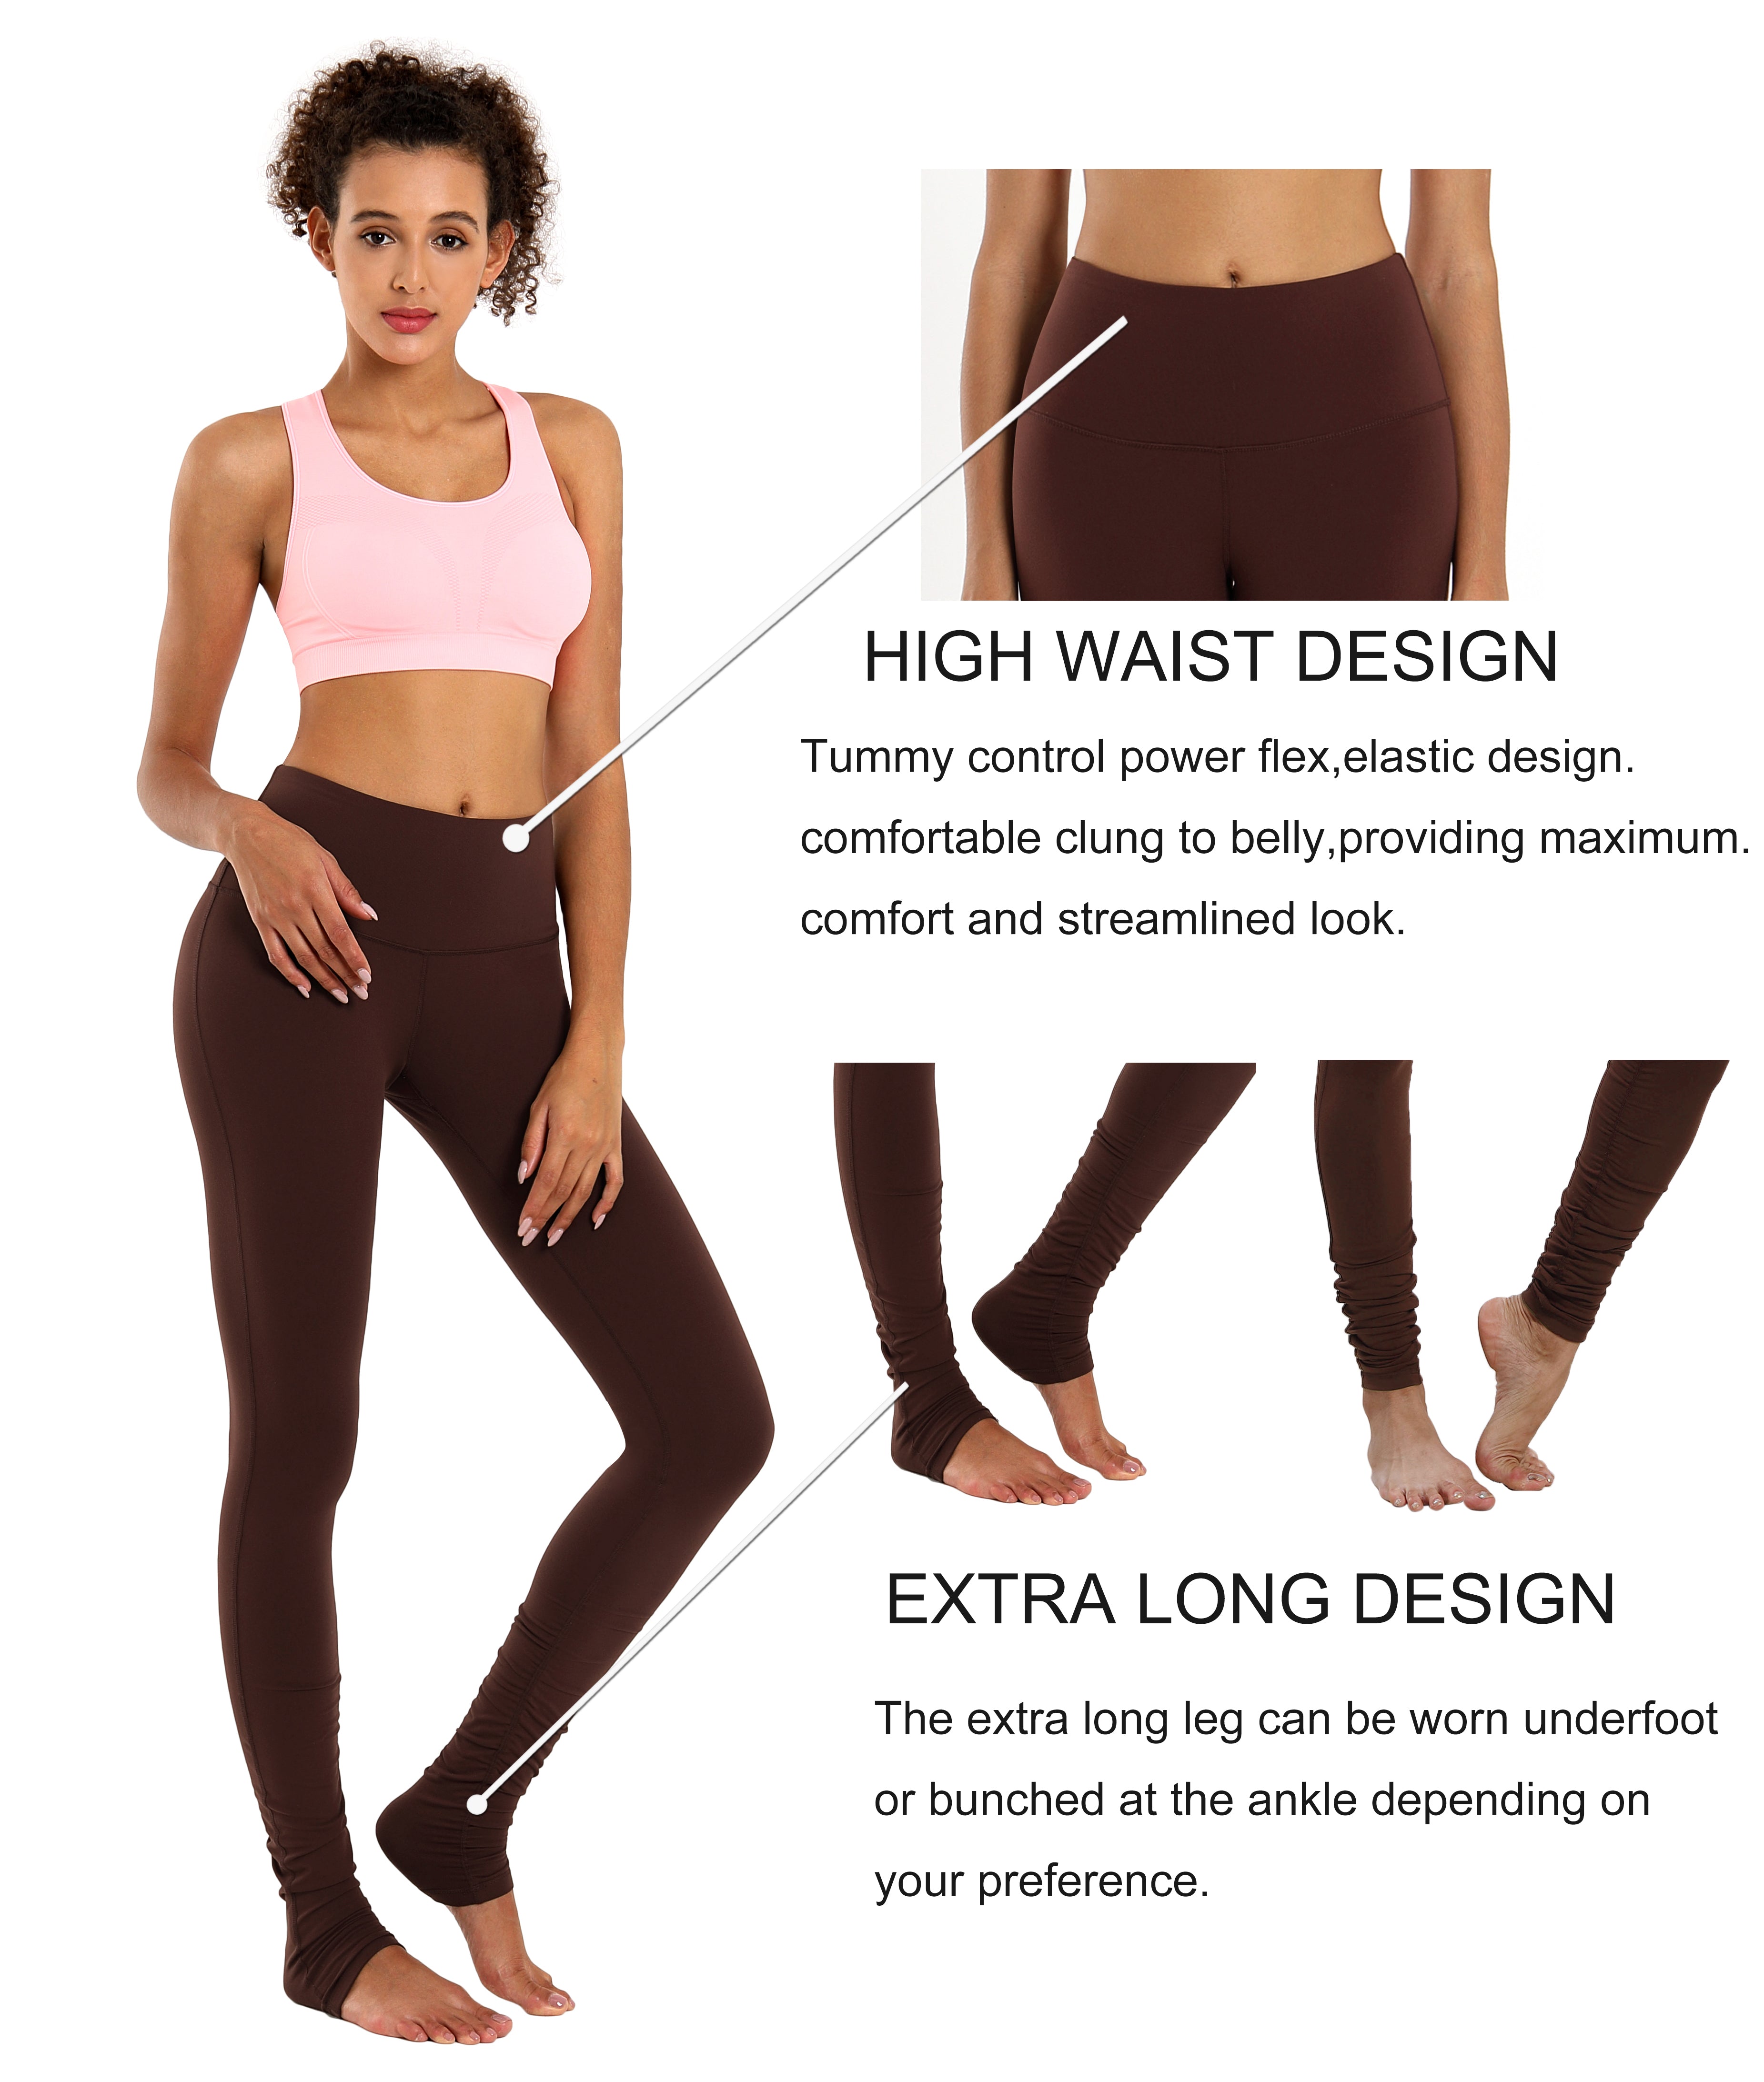 Over the Heel Yoga Pants mahoganymaroon Over the Heel Design 87%Nylon/13%Spandex Fabric doesn't attract lint easily 4-way stretch No see-through Moisture-wicking Tummy control